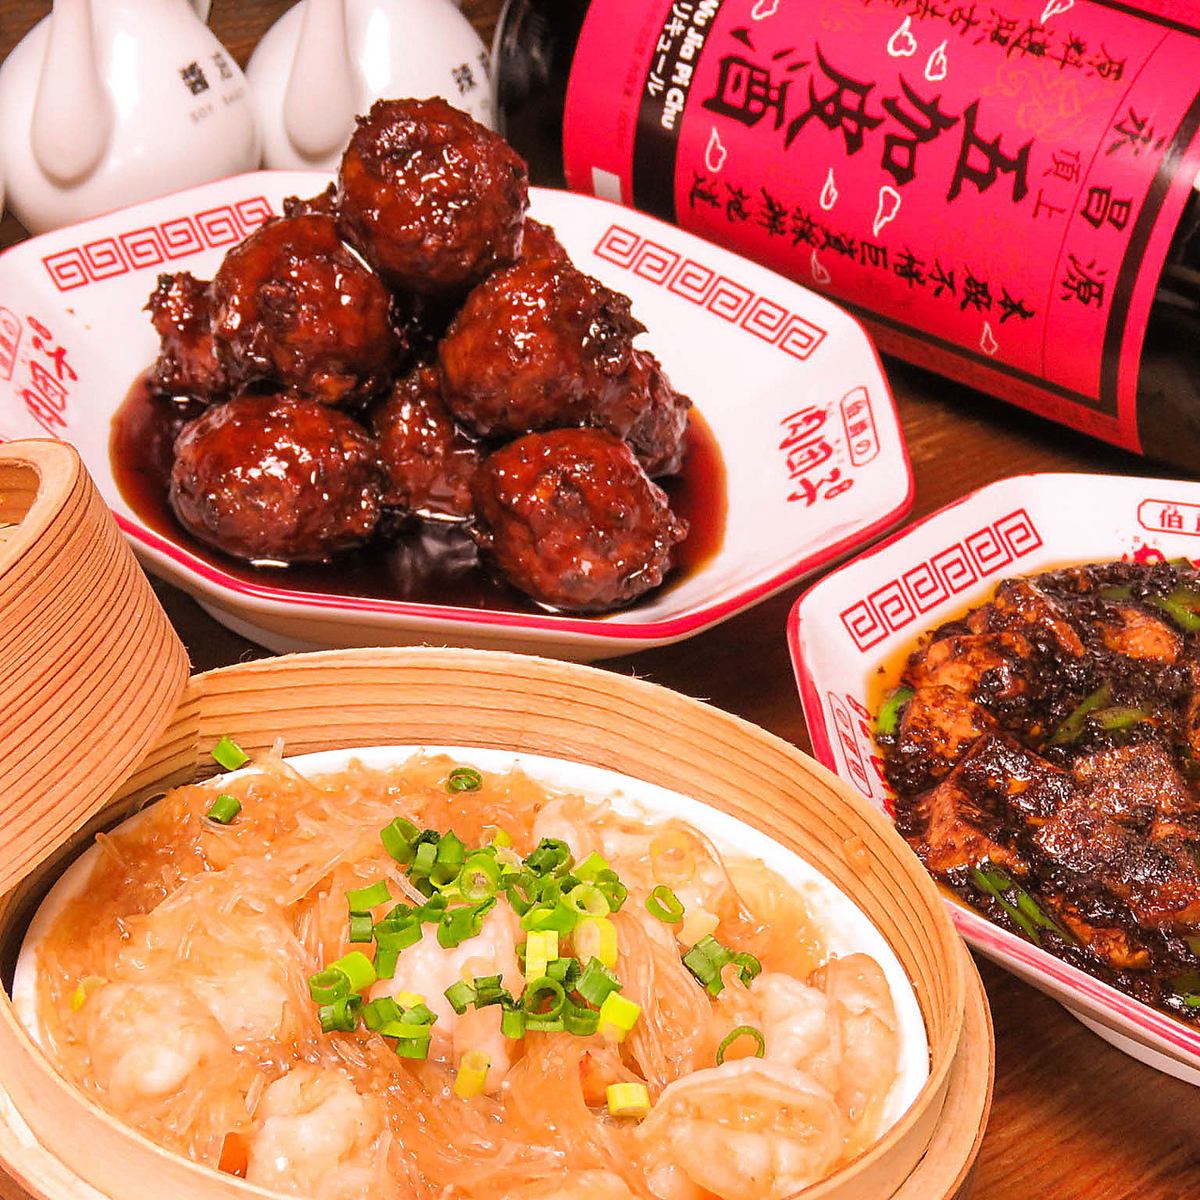 Enjoy authentic Chinese food! We also recommend the famous Count's meat dumplings ◎